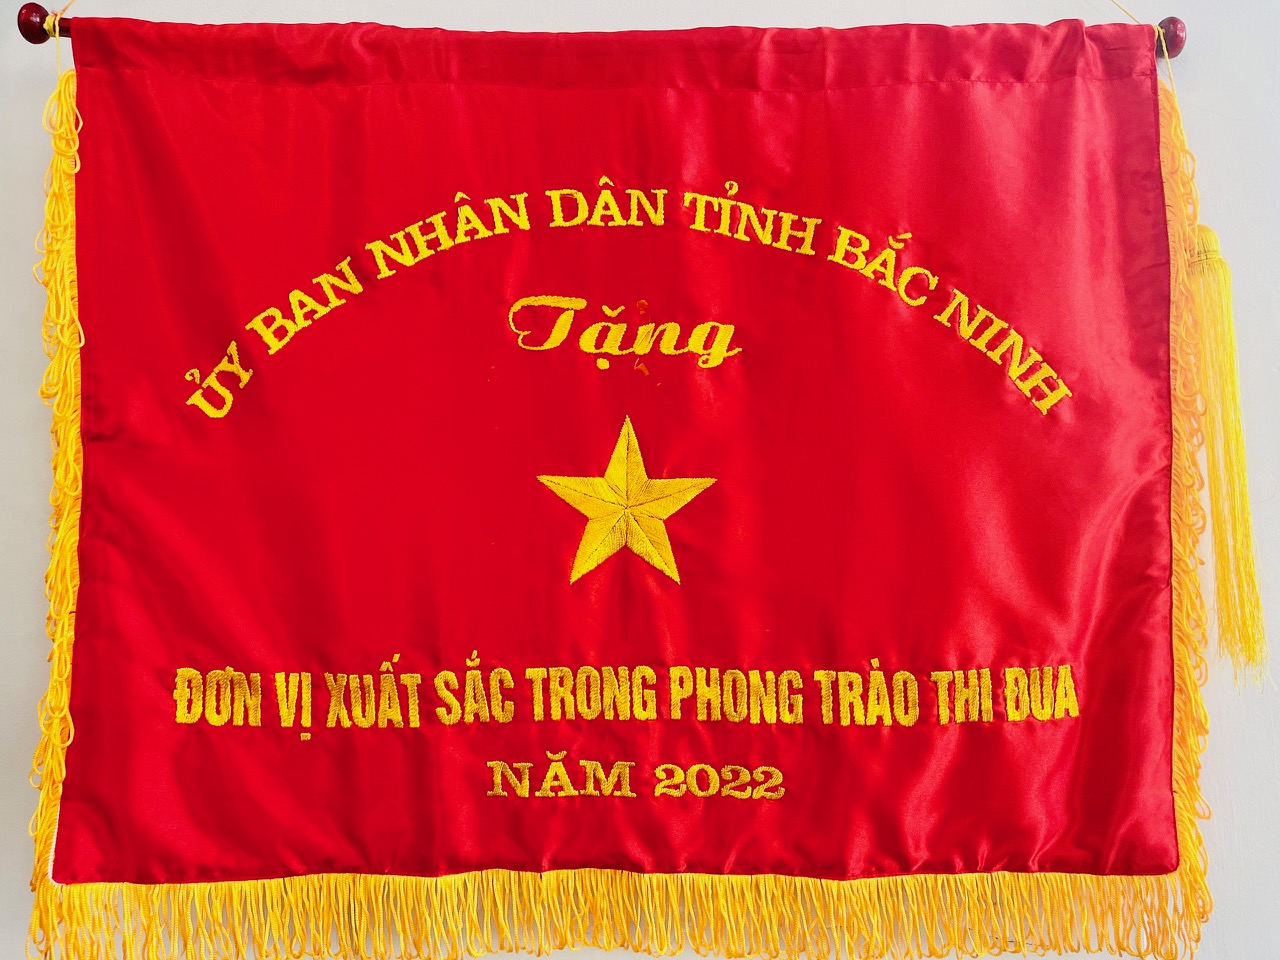 Received emulation flag 'Excellent unit on emulation movement in 2022' of Bac Ninh People Committee (31/01/2023)